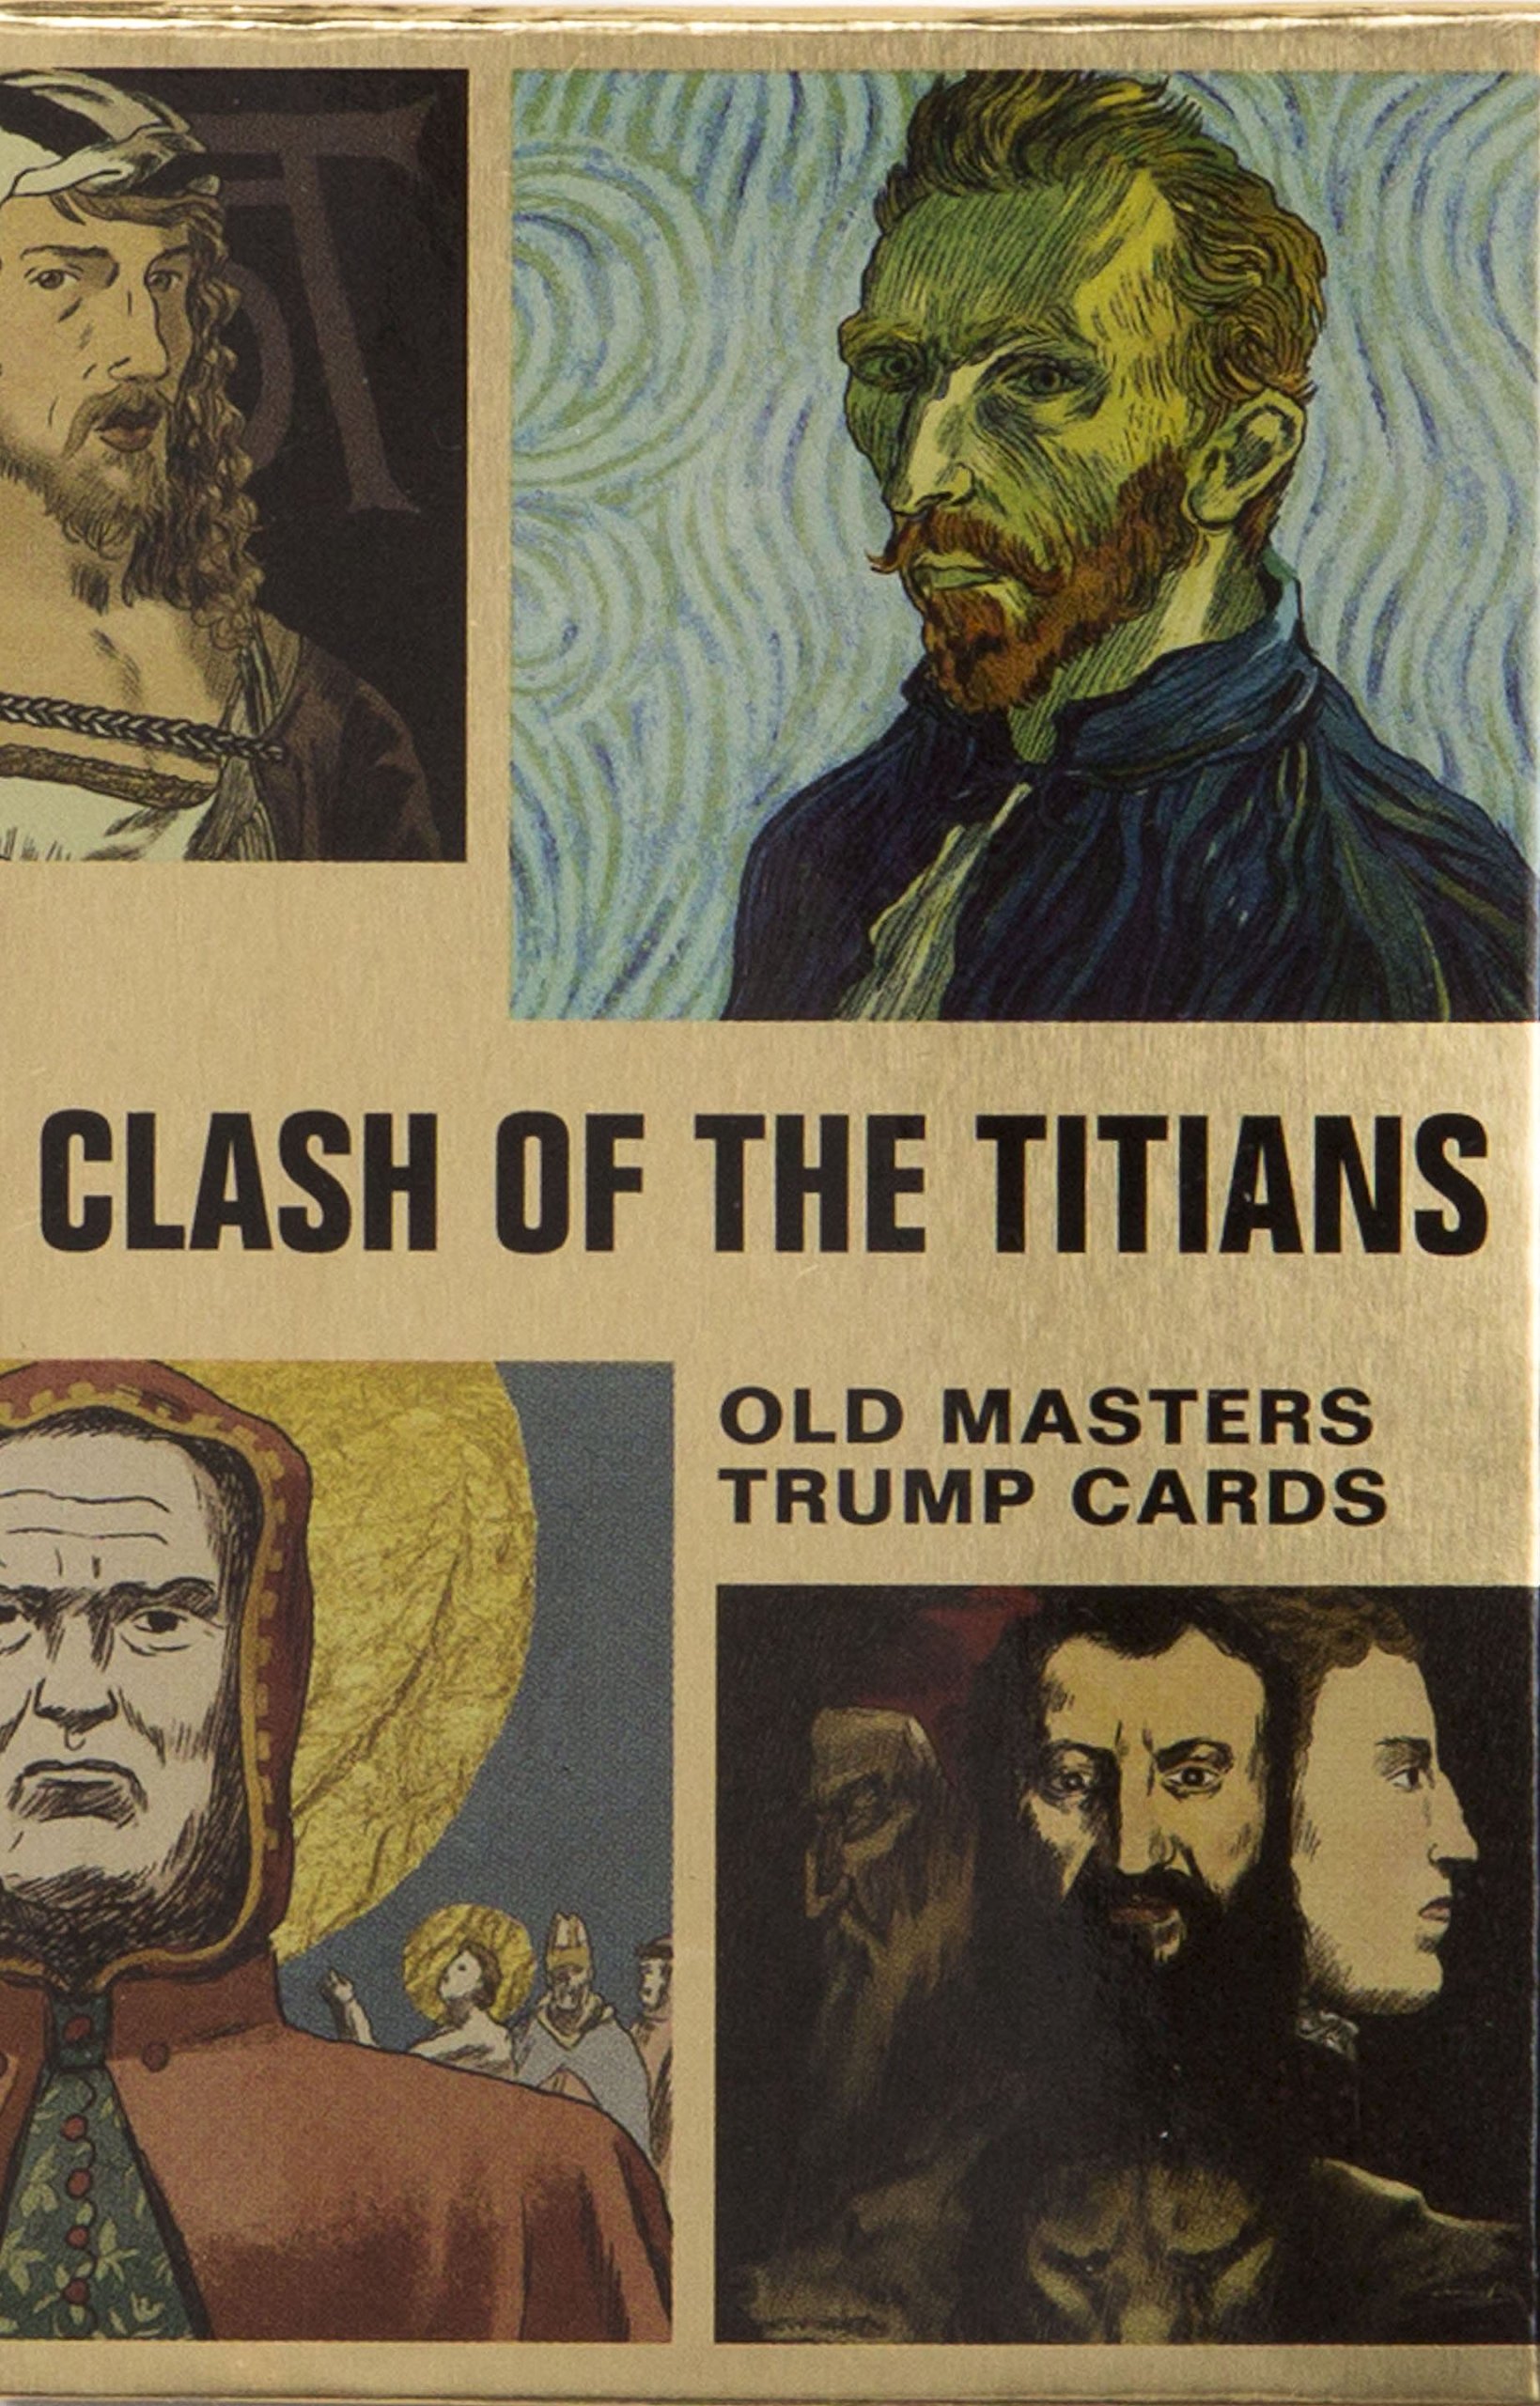 Clash of the Titians | Laurence King Publishing